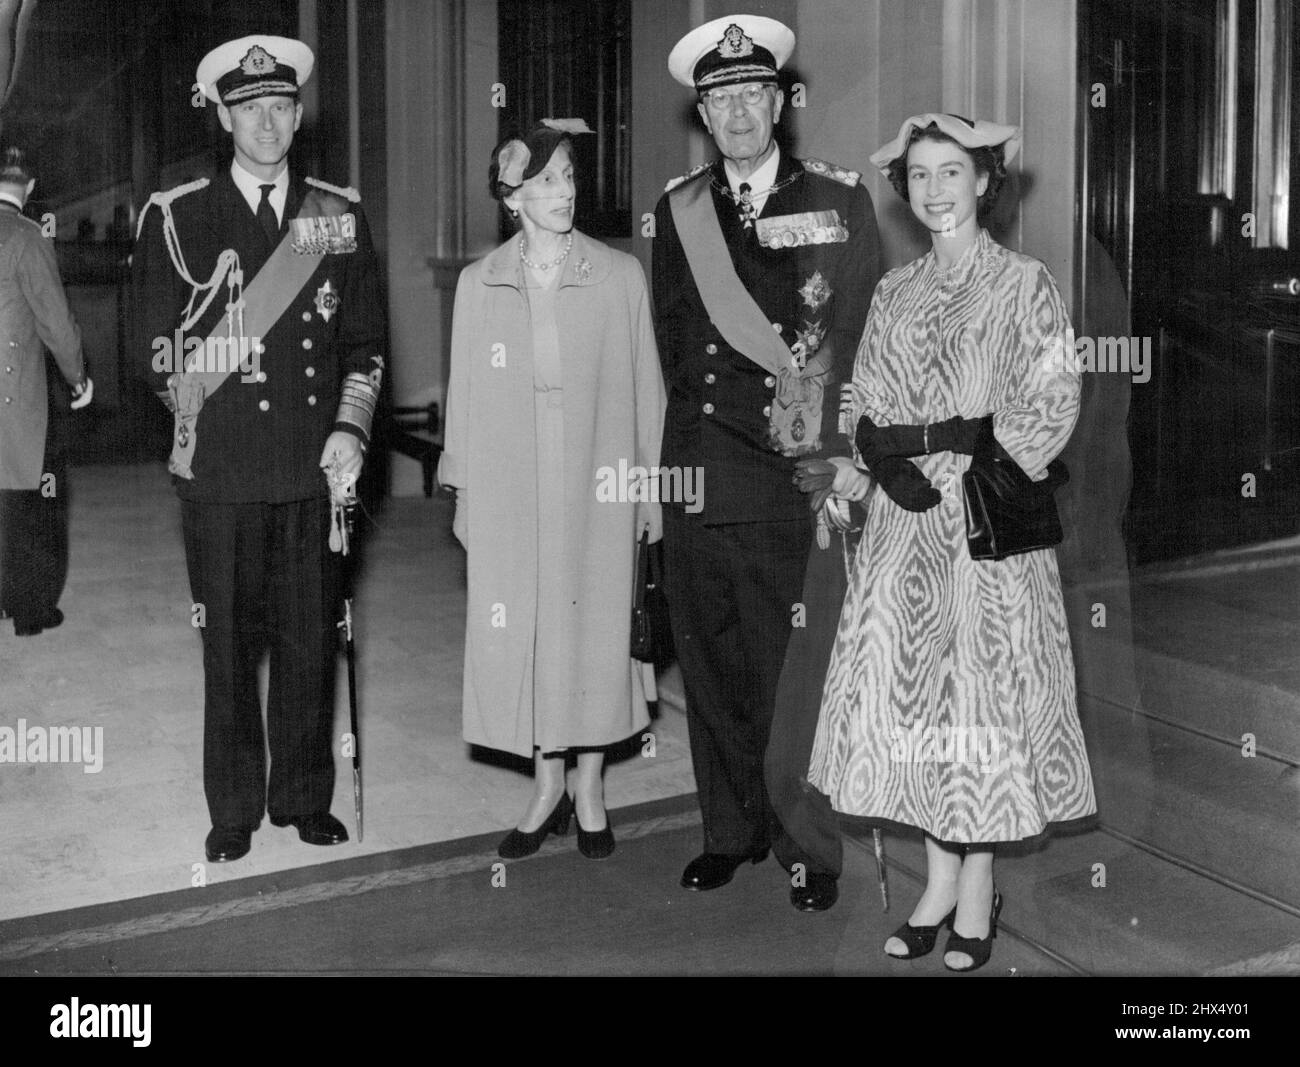 Royal Visitors : The Queen and Duke of Edinburgh, who welcomed their guests at Westminster Pier, seen with King Gustav Adolf & Queen Louise of Sweden after their arrival at the Palace. The coat that caused all the talk. The coat Queen Elizabeth wore to welcome King and Queen of Sweden to London has set British women talking. One woman said the Queen's coat was just like the toffee-whirl children eat. June 28, 1954. Stock Photo